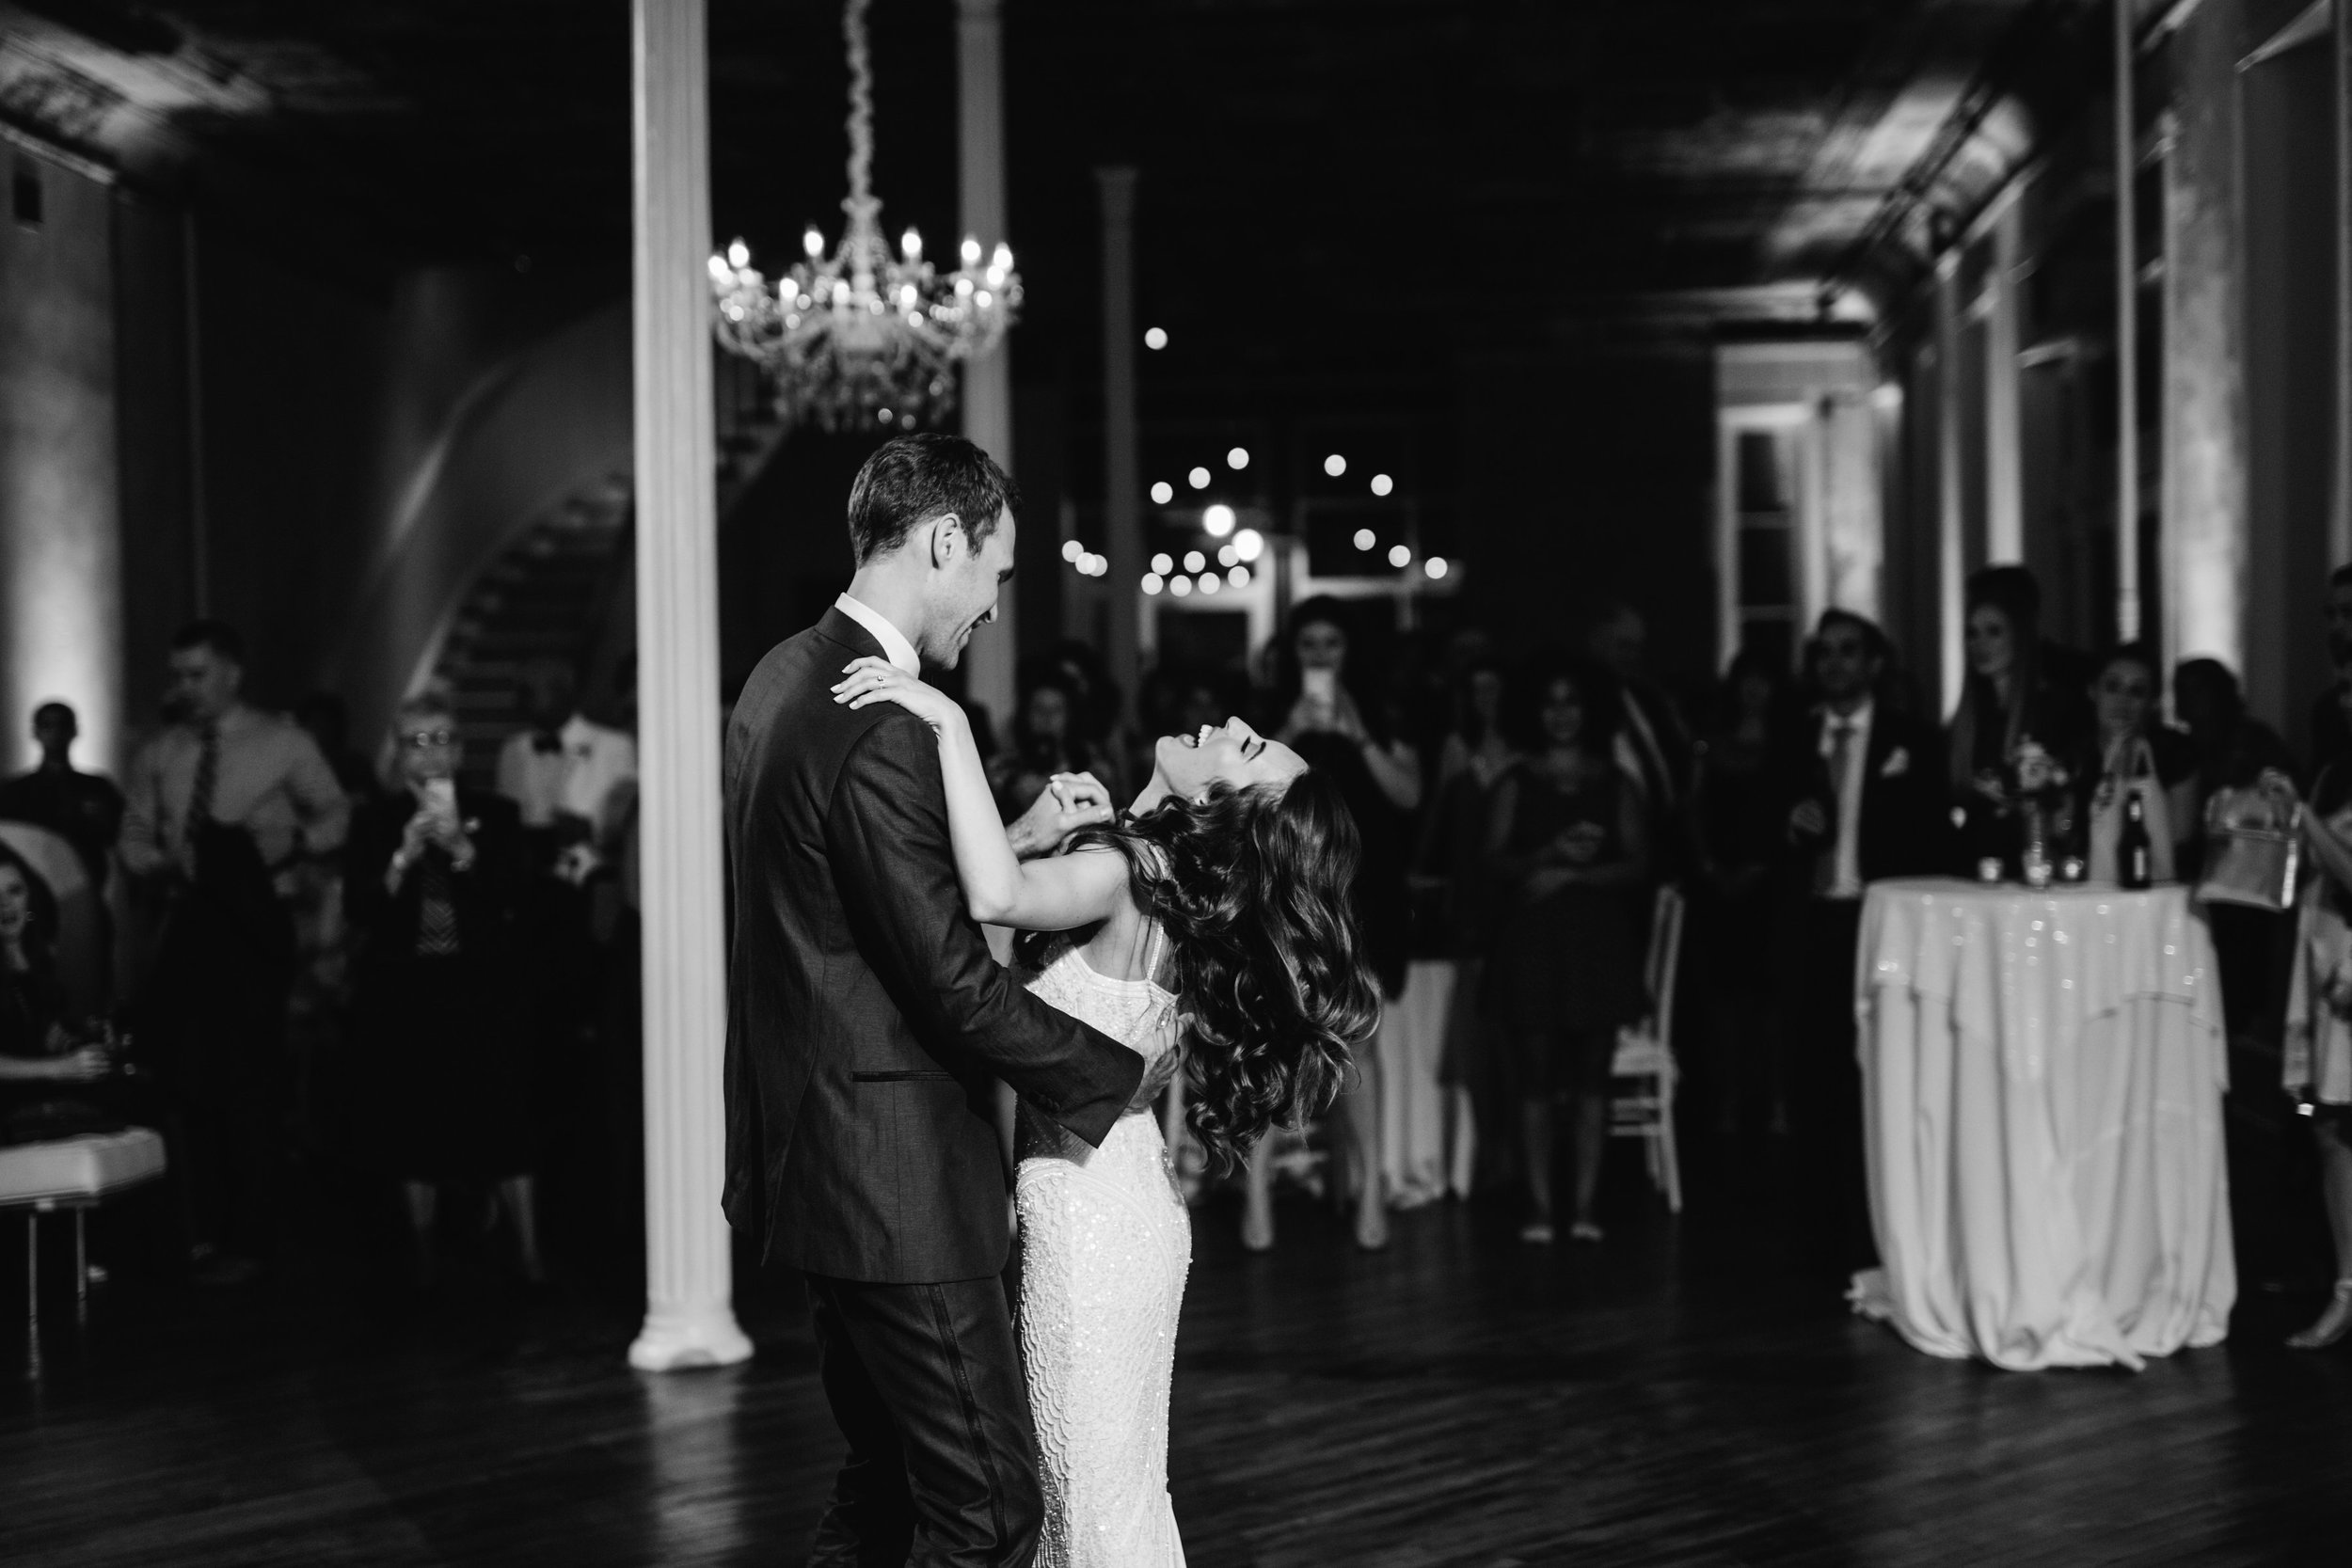 Groom and bride laughing during wedding reception black and white